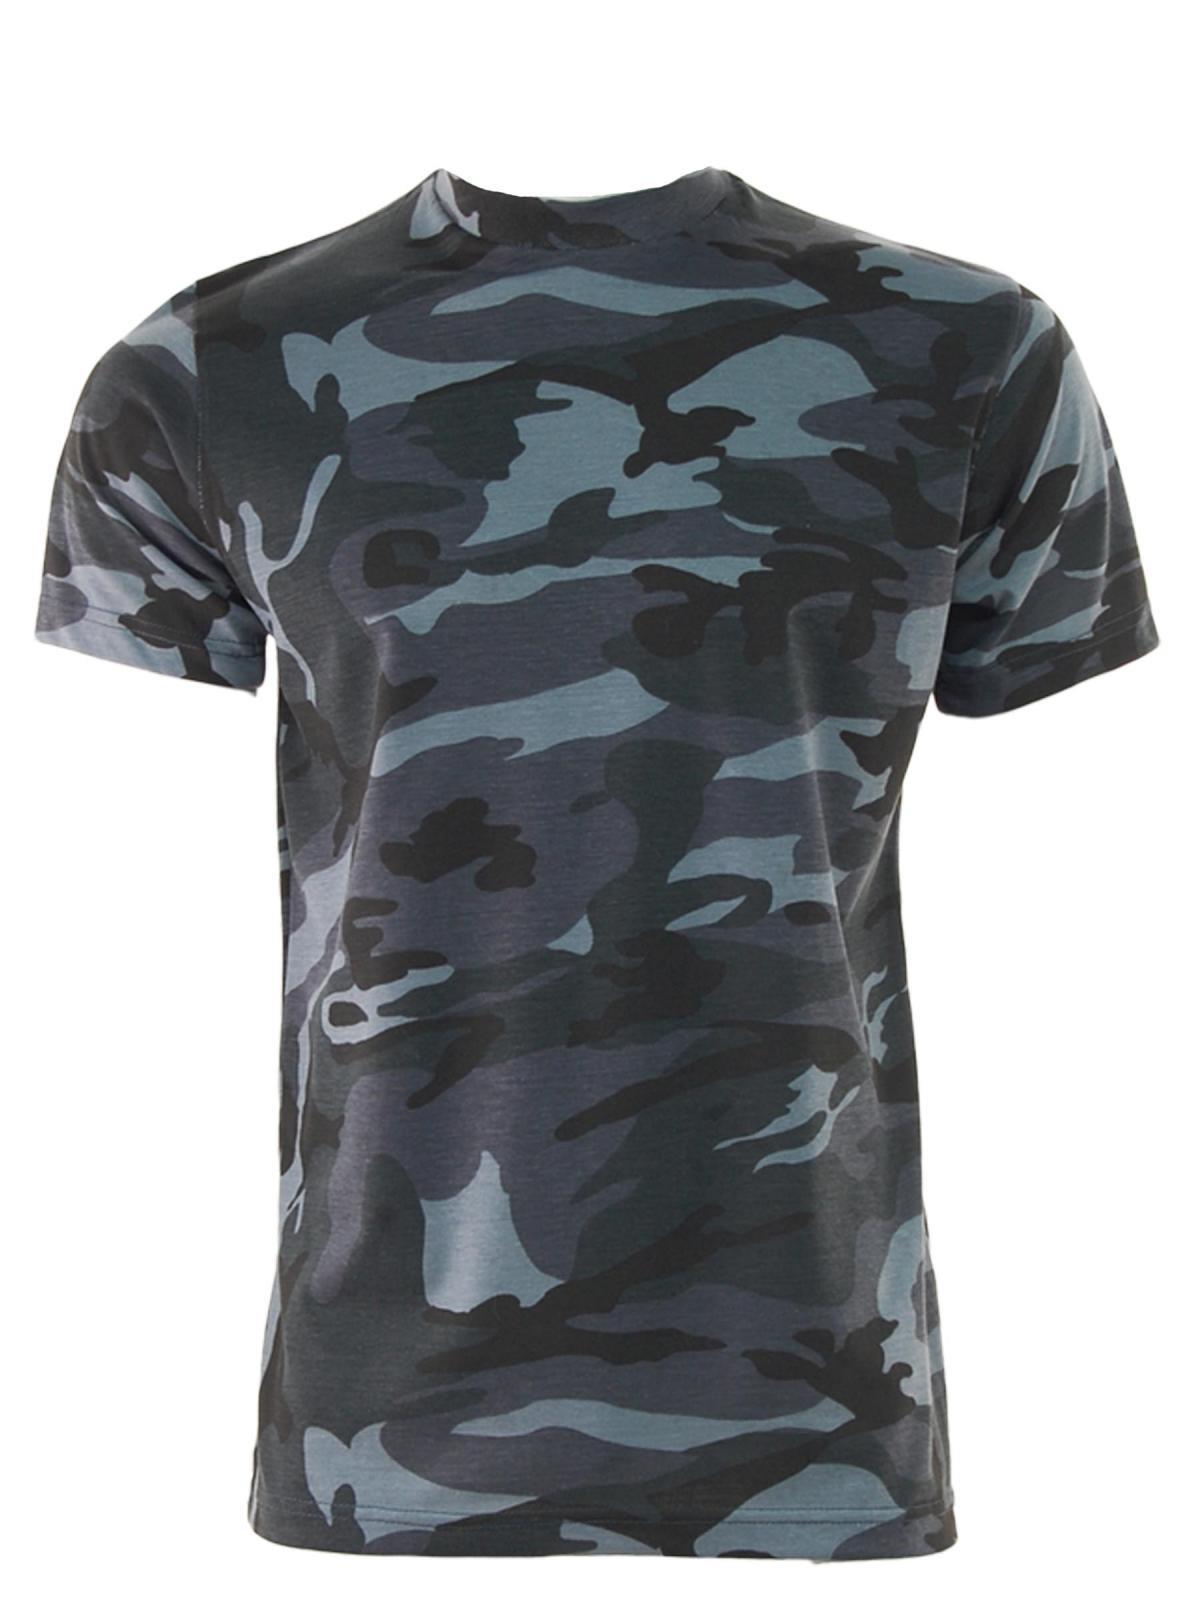 Mens GAME Camouflage Short Sleeve Camo T-Shirt Army Military Hunting ...